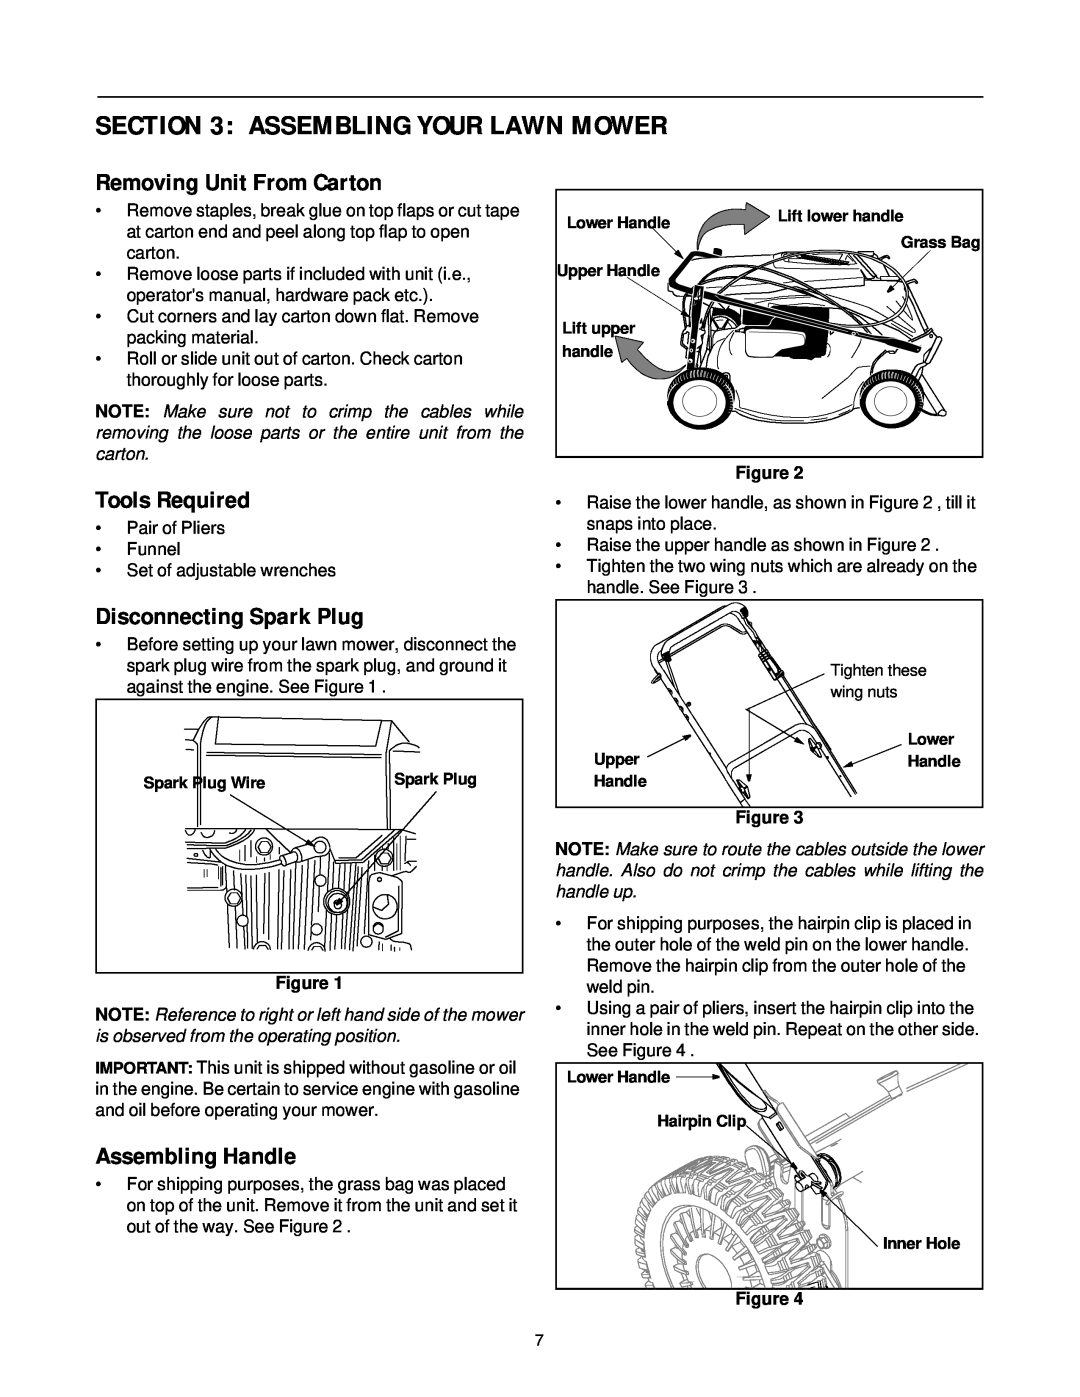 MTD 469 Assembling Your Lawn Mower, Removing Unit From Carton, Tools Required, Disconnecting Spark Plug, Assembling Handle 